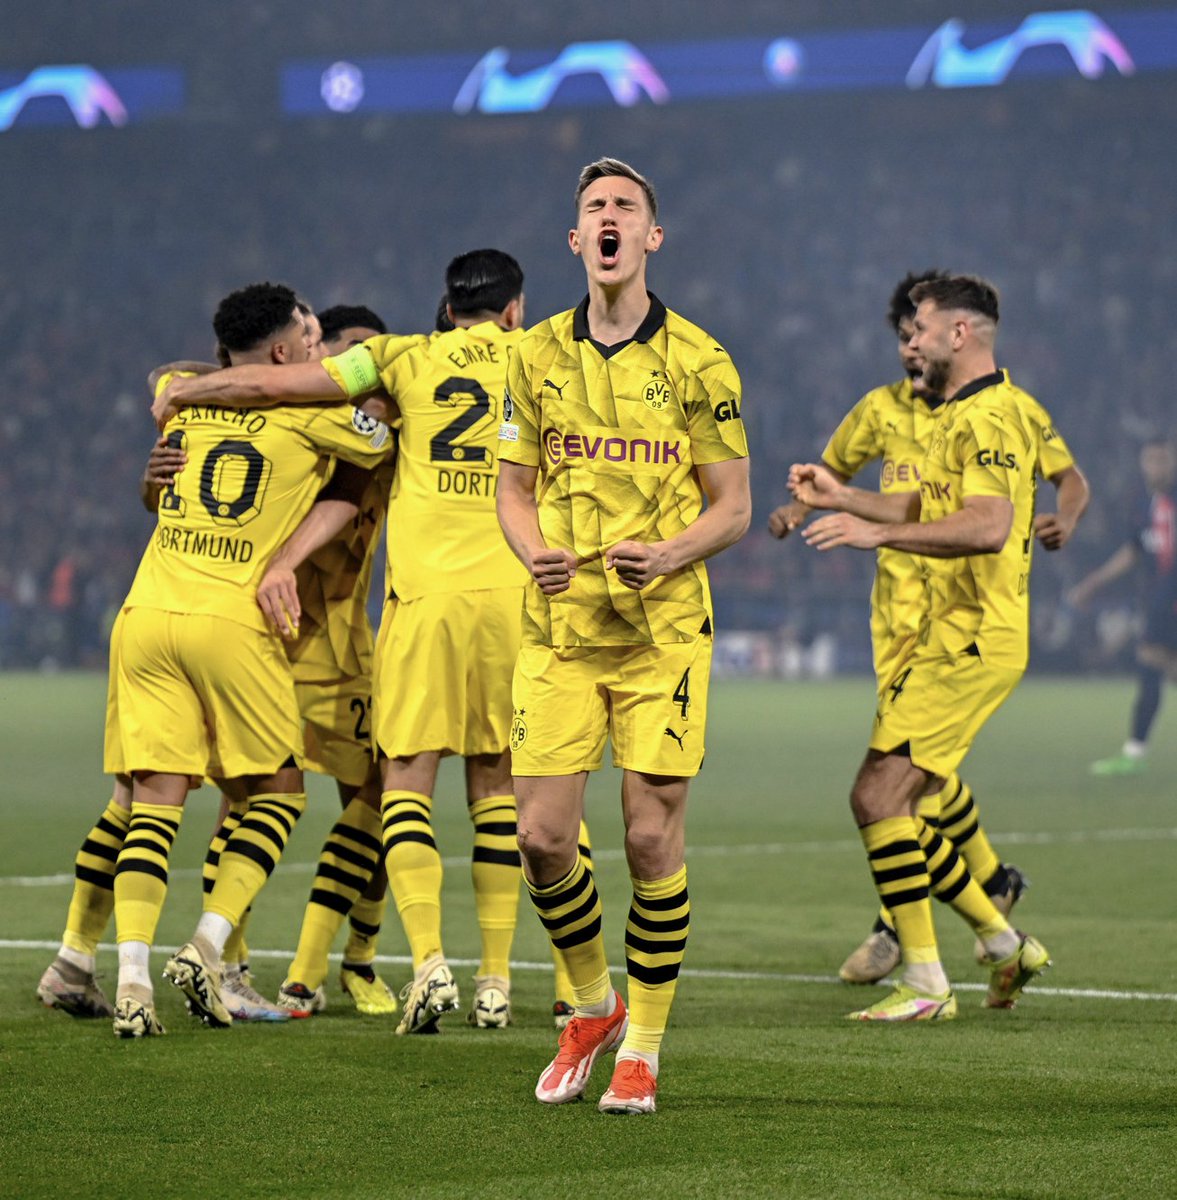 FT: Paris Saint-Germain 0-1 Borussia Dortmund (0-2 AGG). BORUSSIA DORTMUND HAVE REACHED THE CHAMPIONS LEAGUE FINAL AND ARE GOING TO WEMBLEY! 🟡